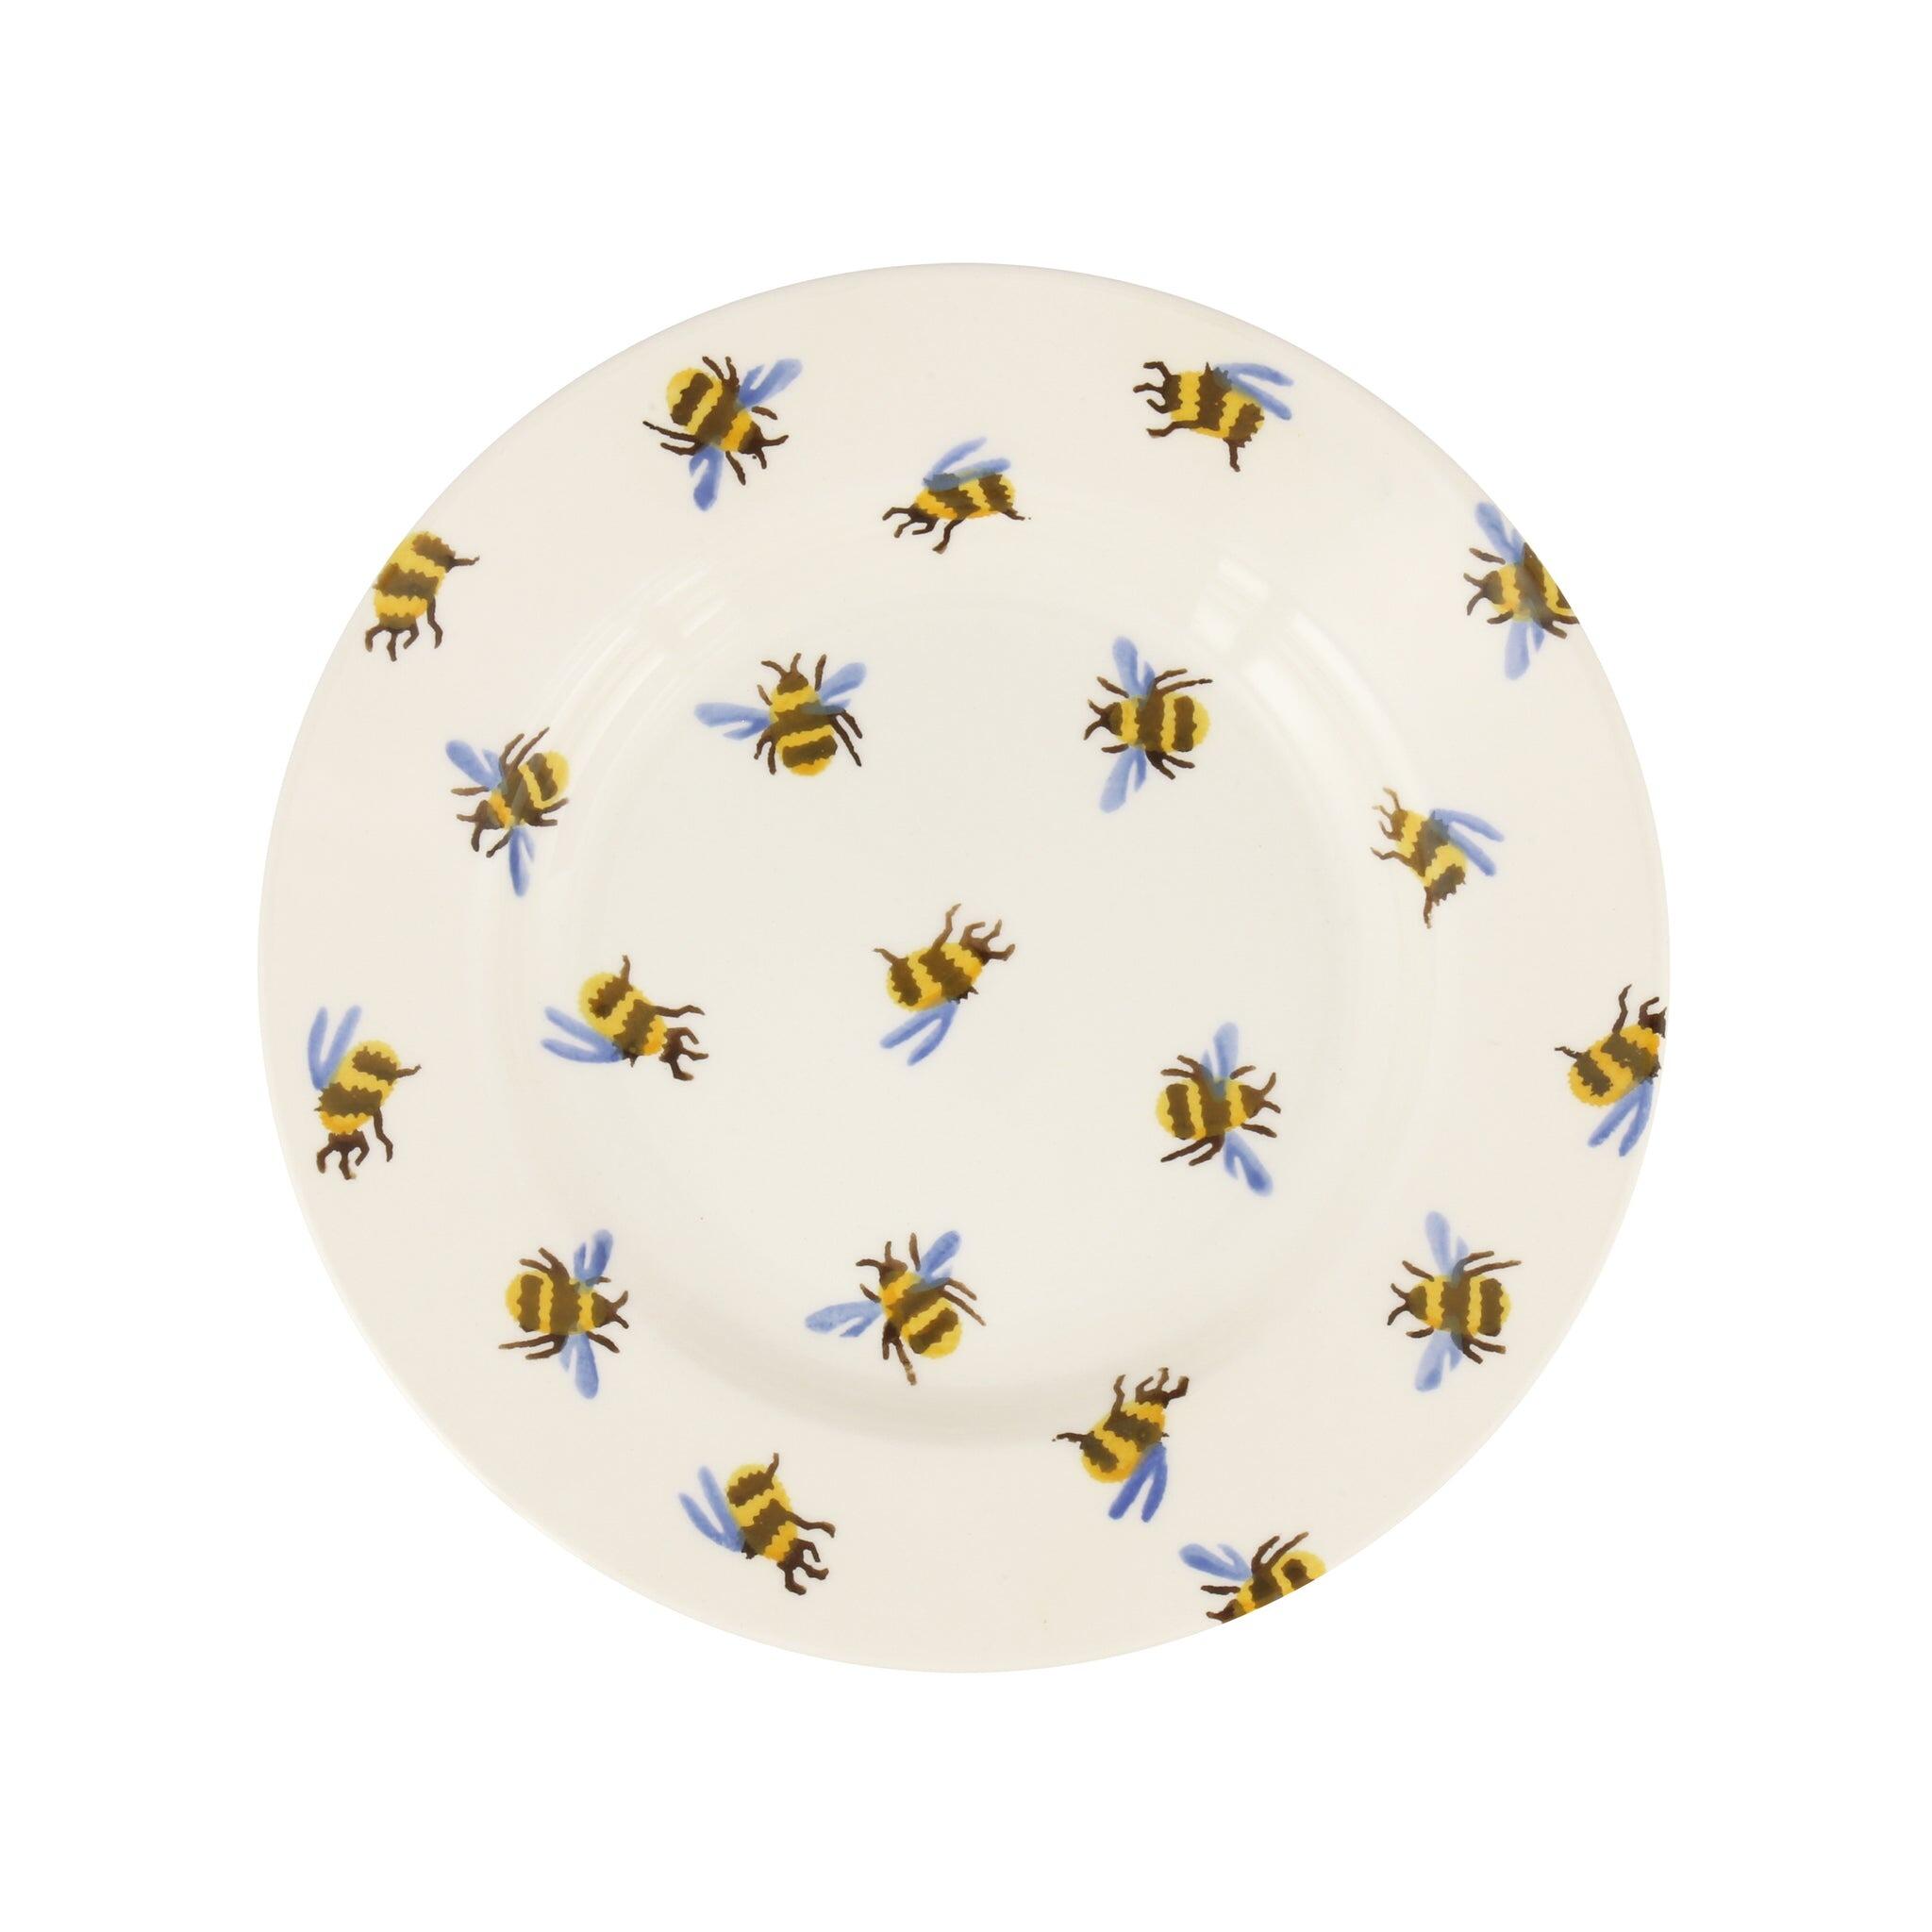 Emma Bridgewater Bumblebee and Insects